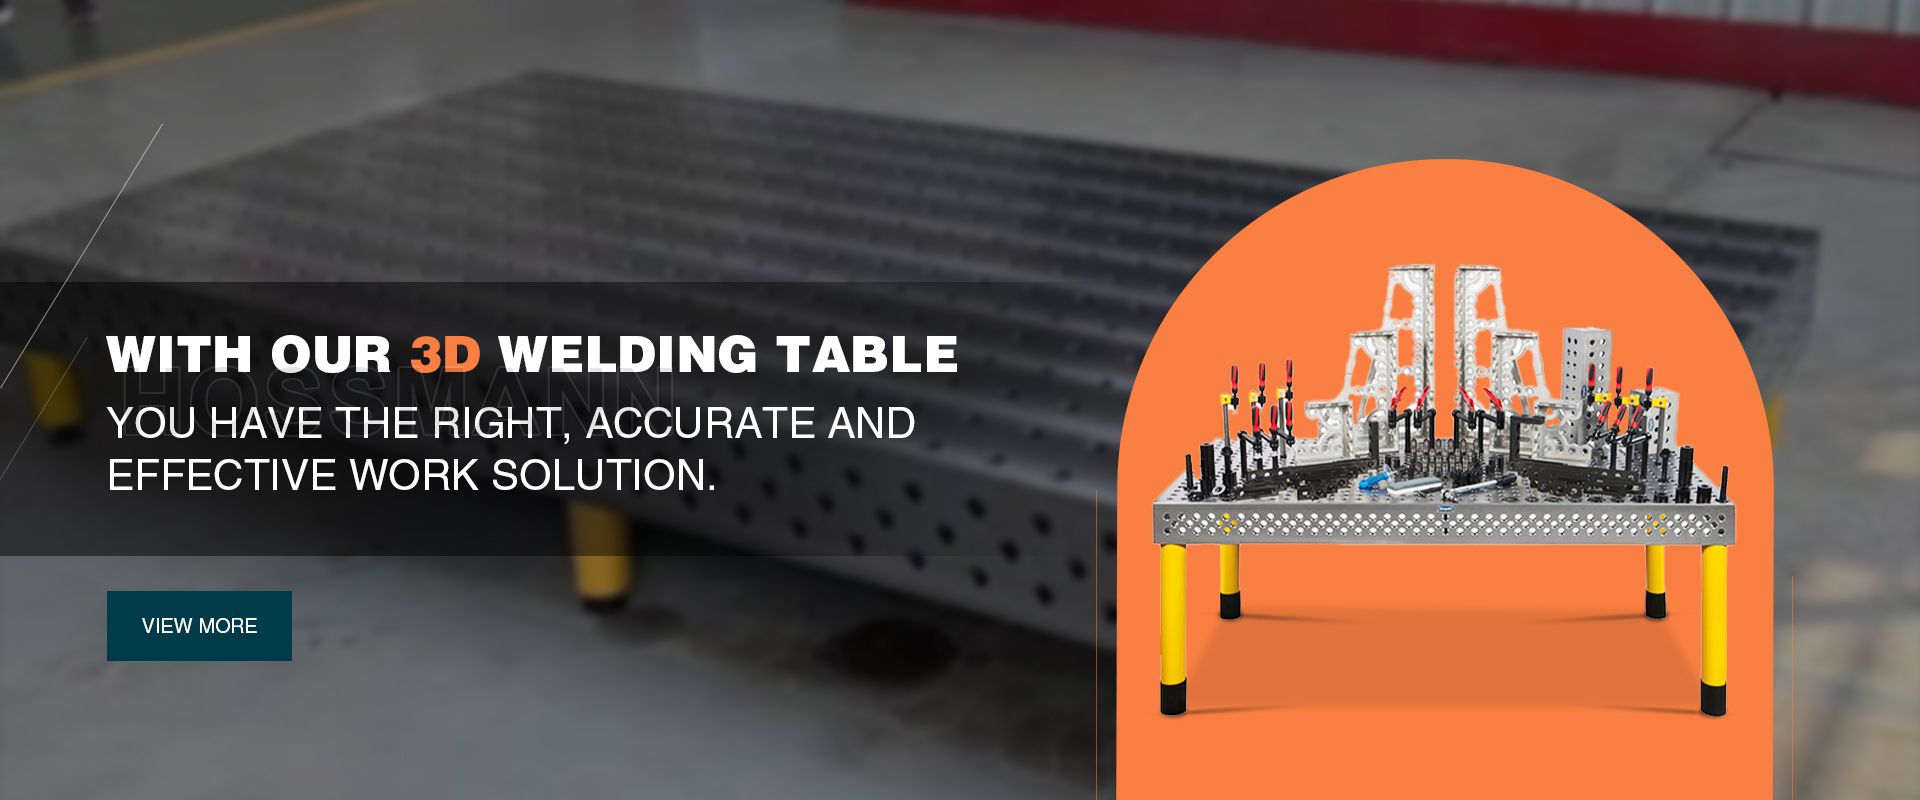 3D Welding Table With Leveling Feet